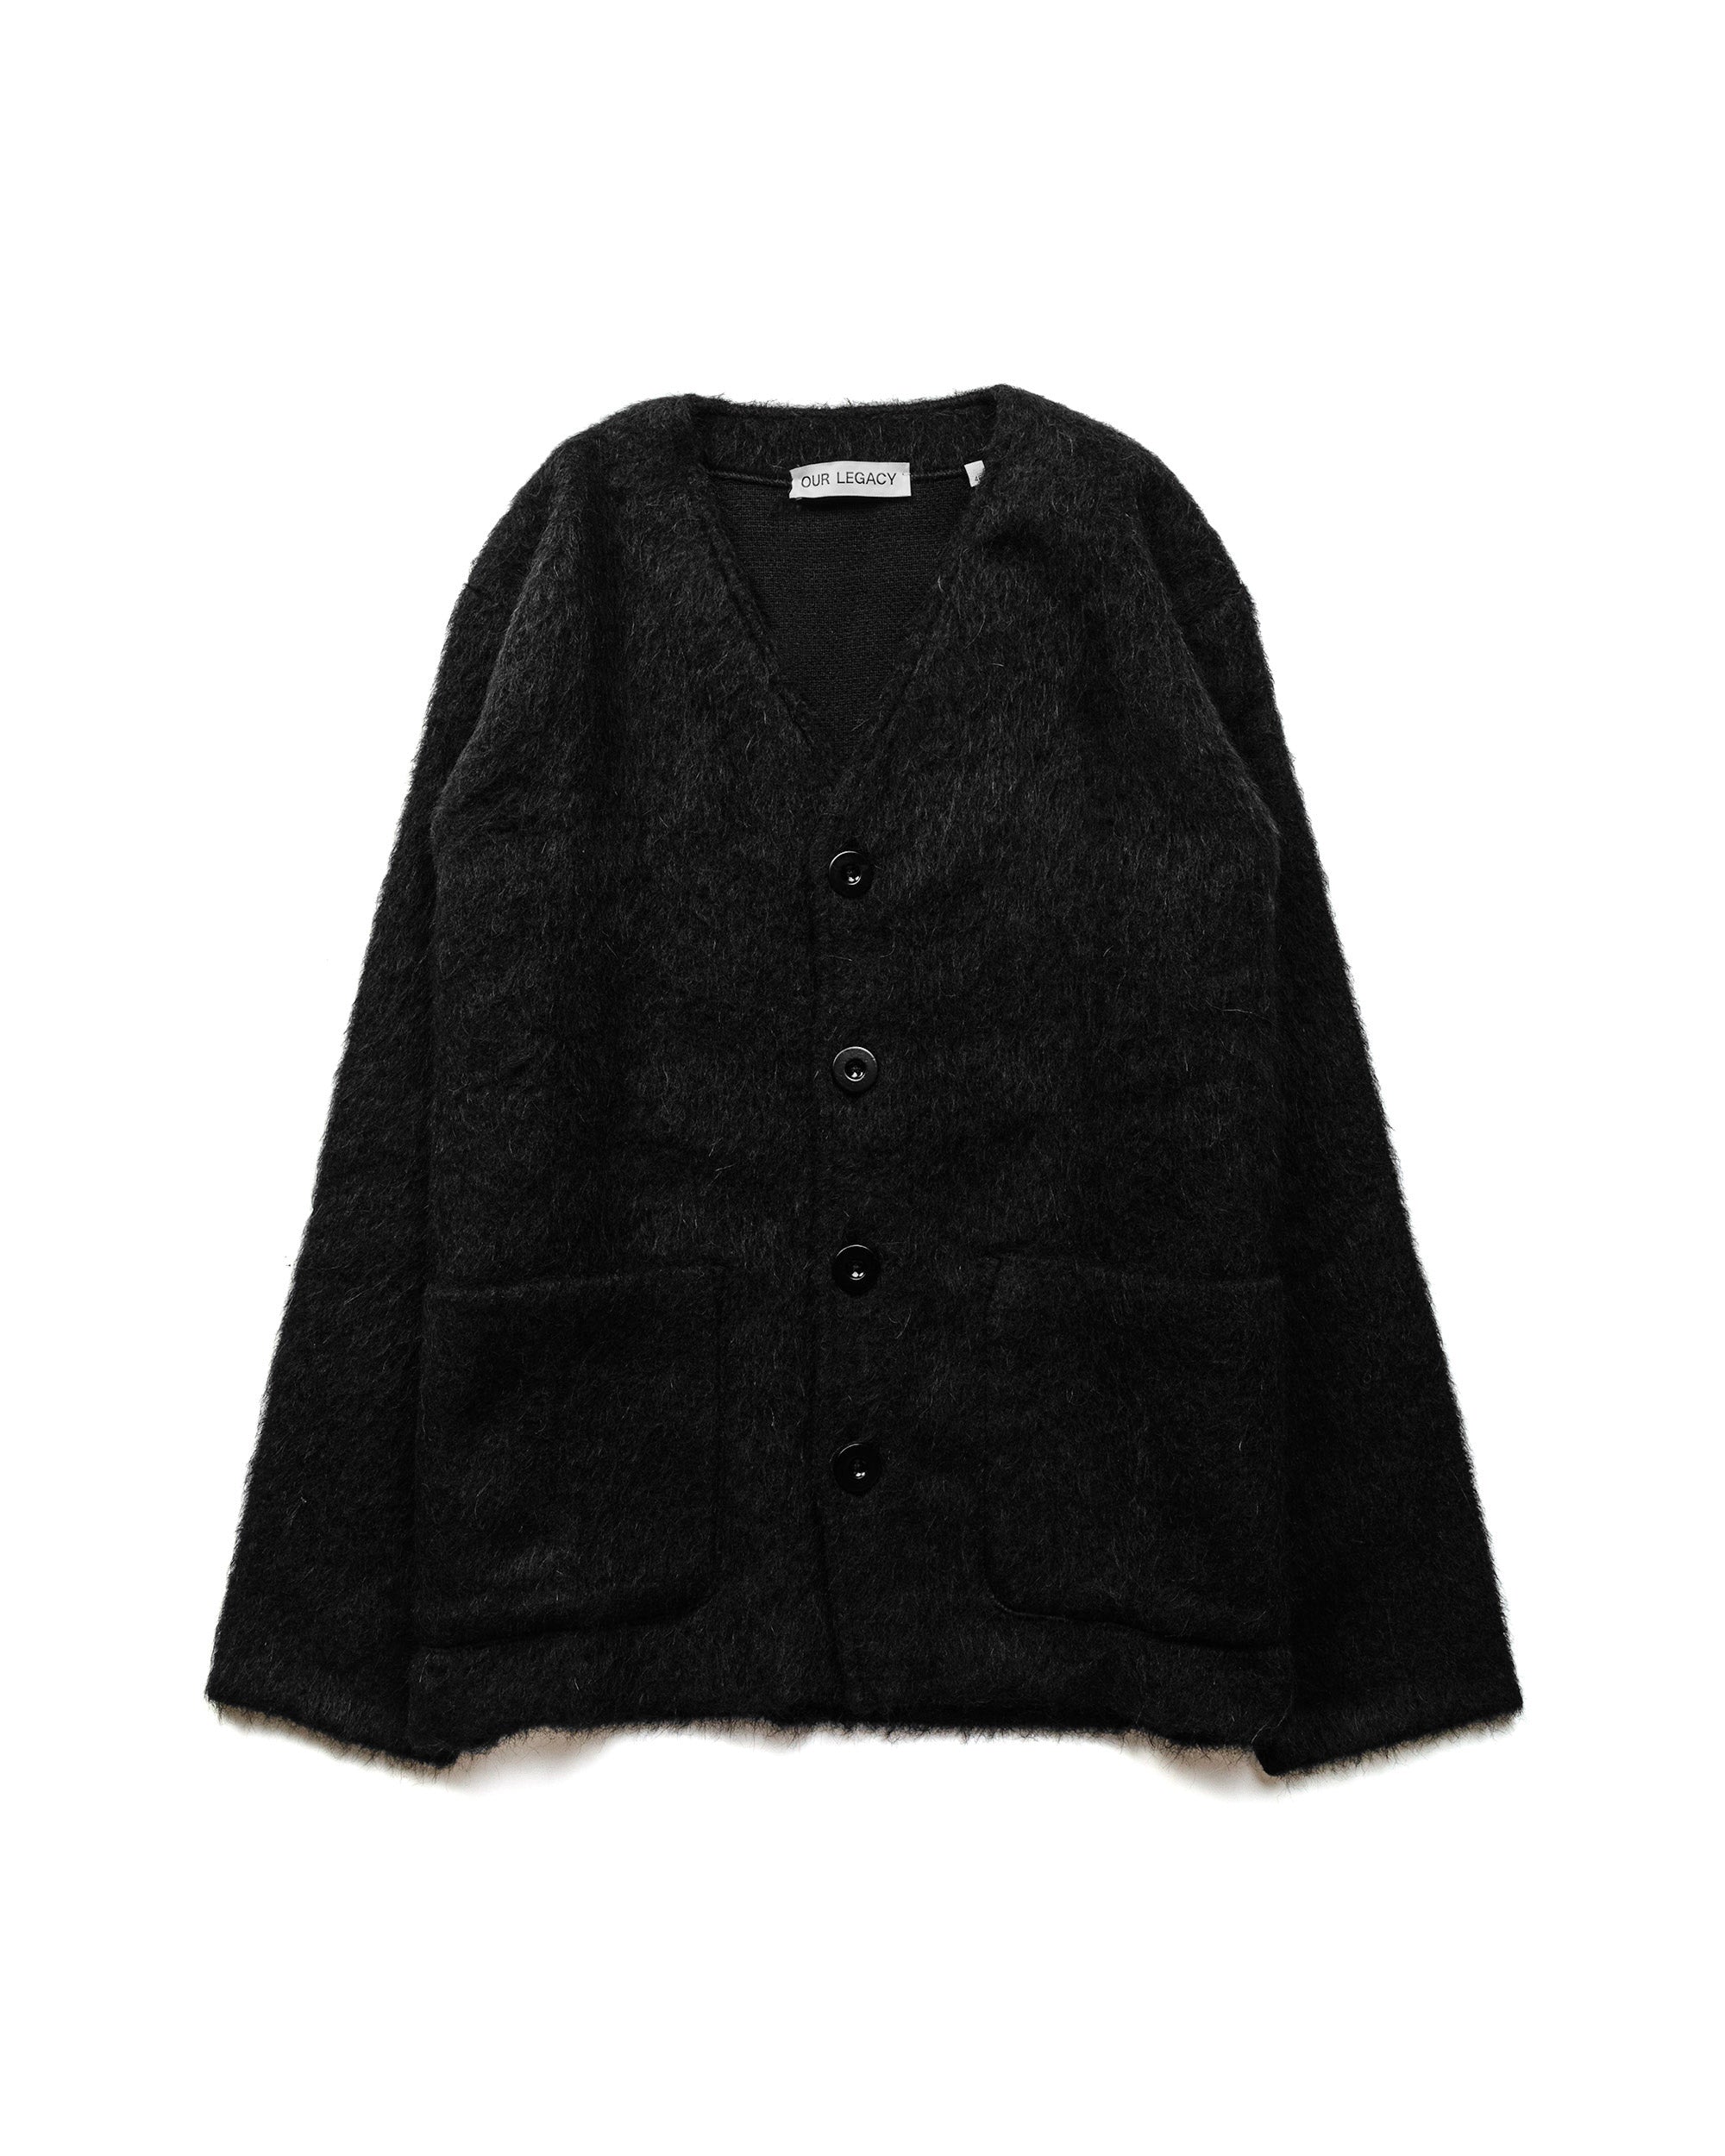 OUR LEGACY BLACK MOHAIR CARDIGAN46